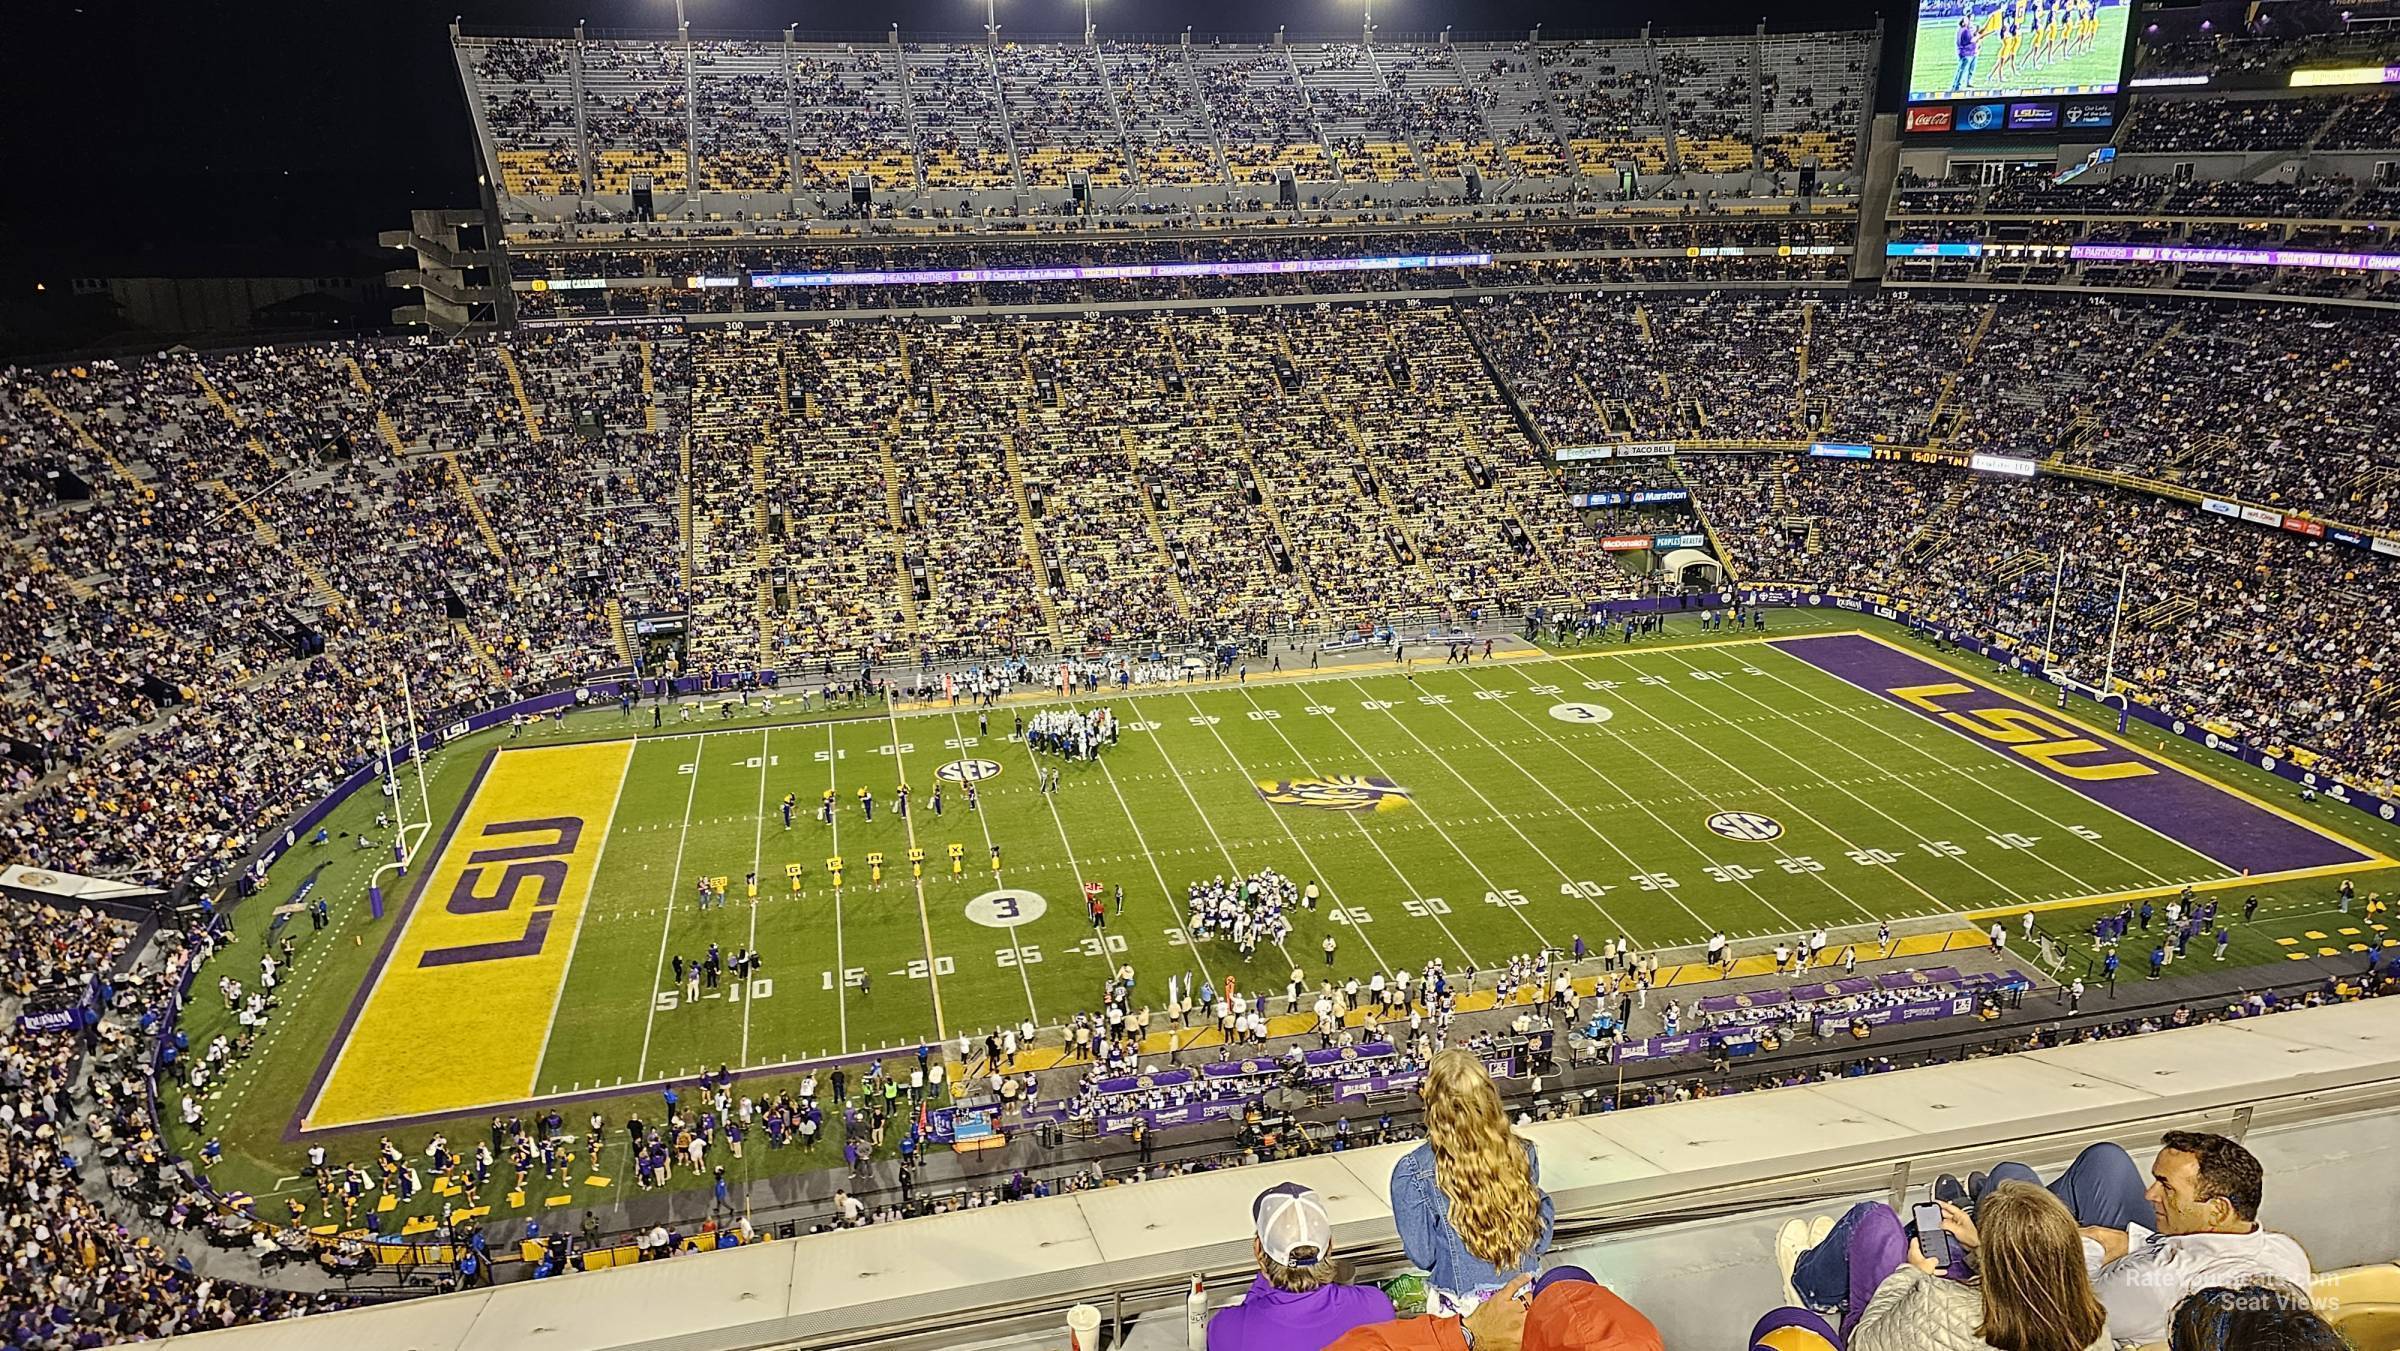 section 518, row 4 seat view  - tiger stadium